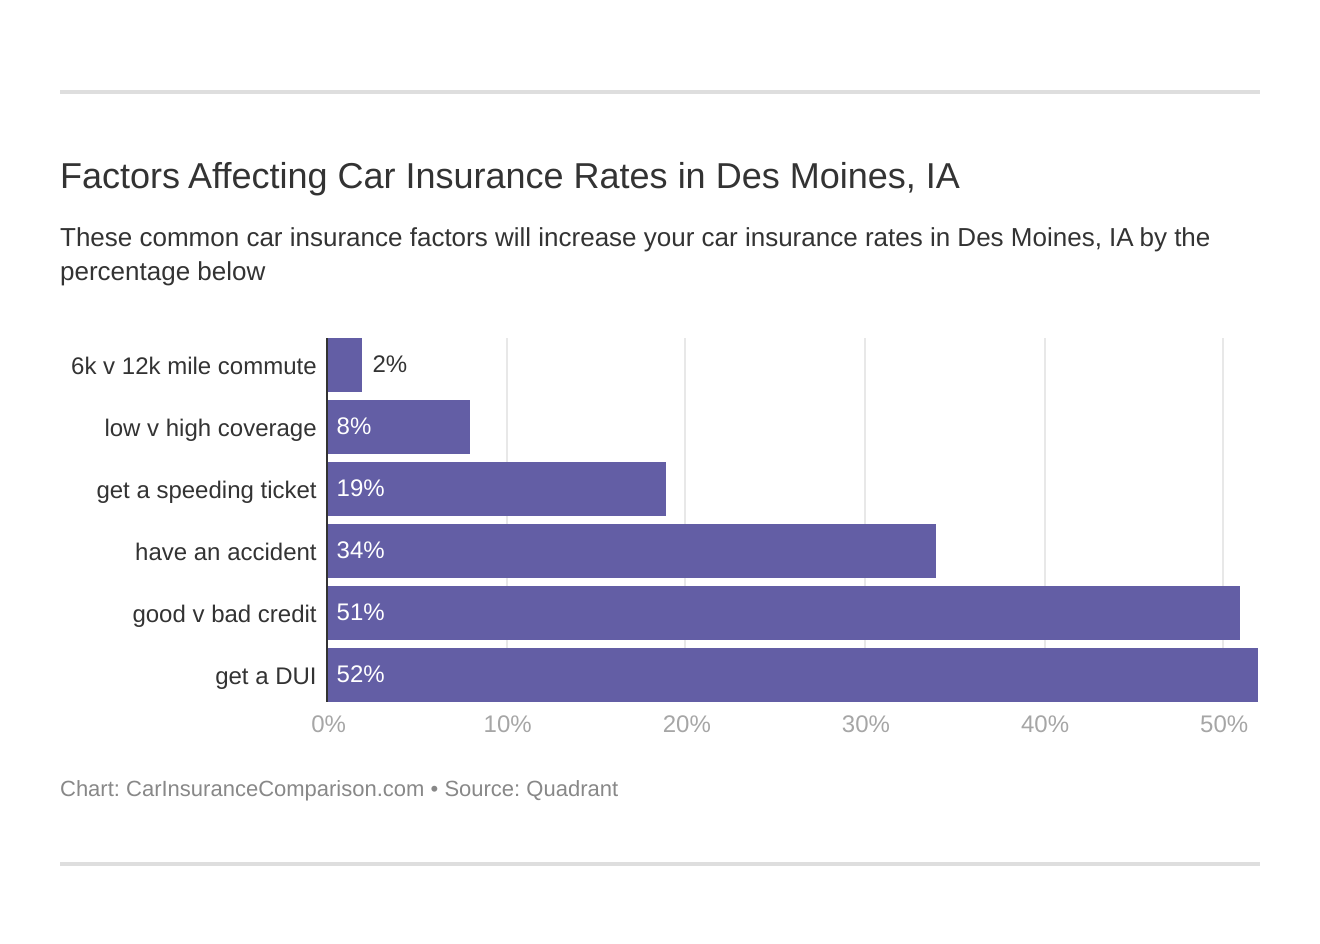 Factors Affecting Car Insurance Rates in Des Moines, IA